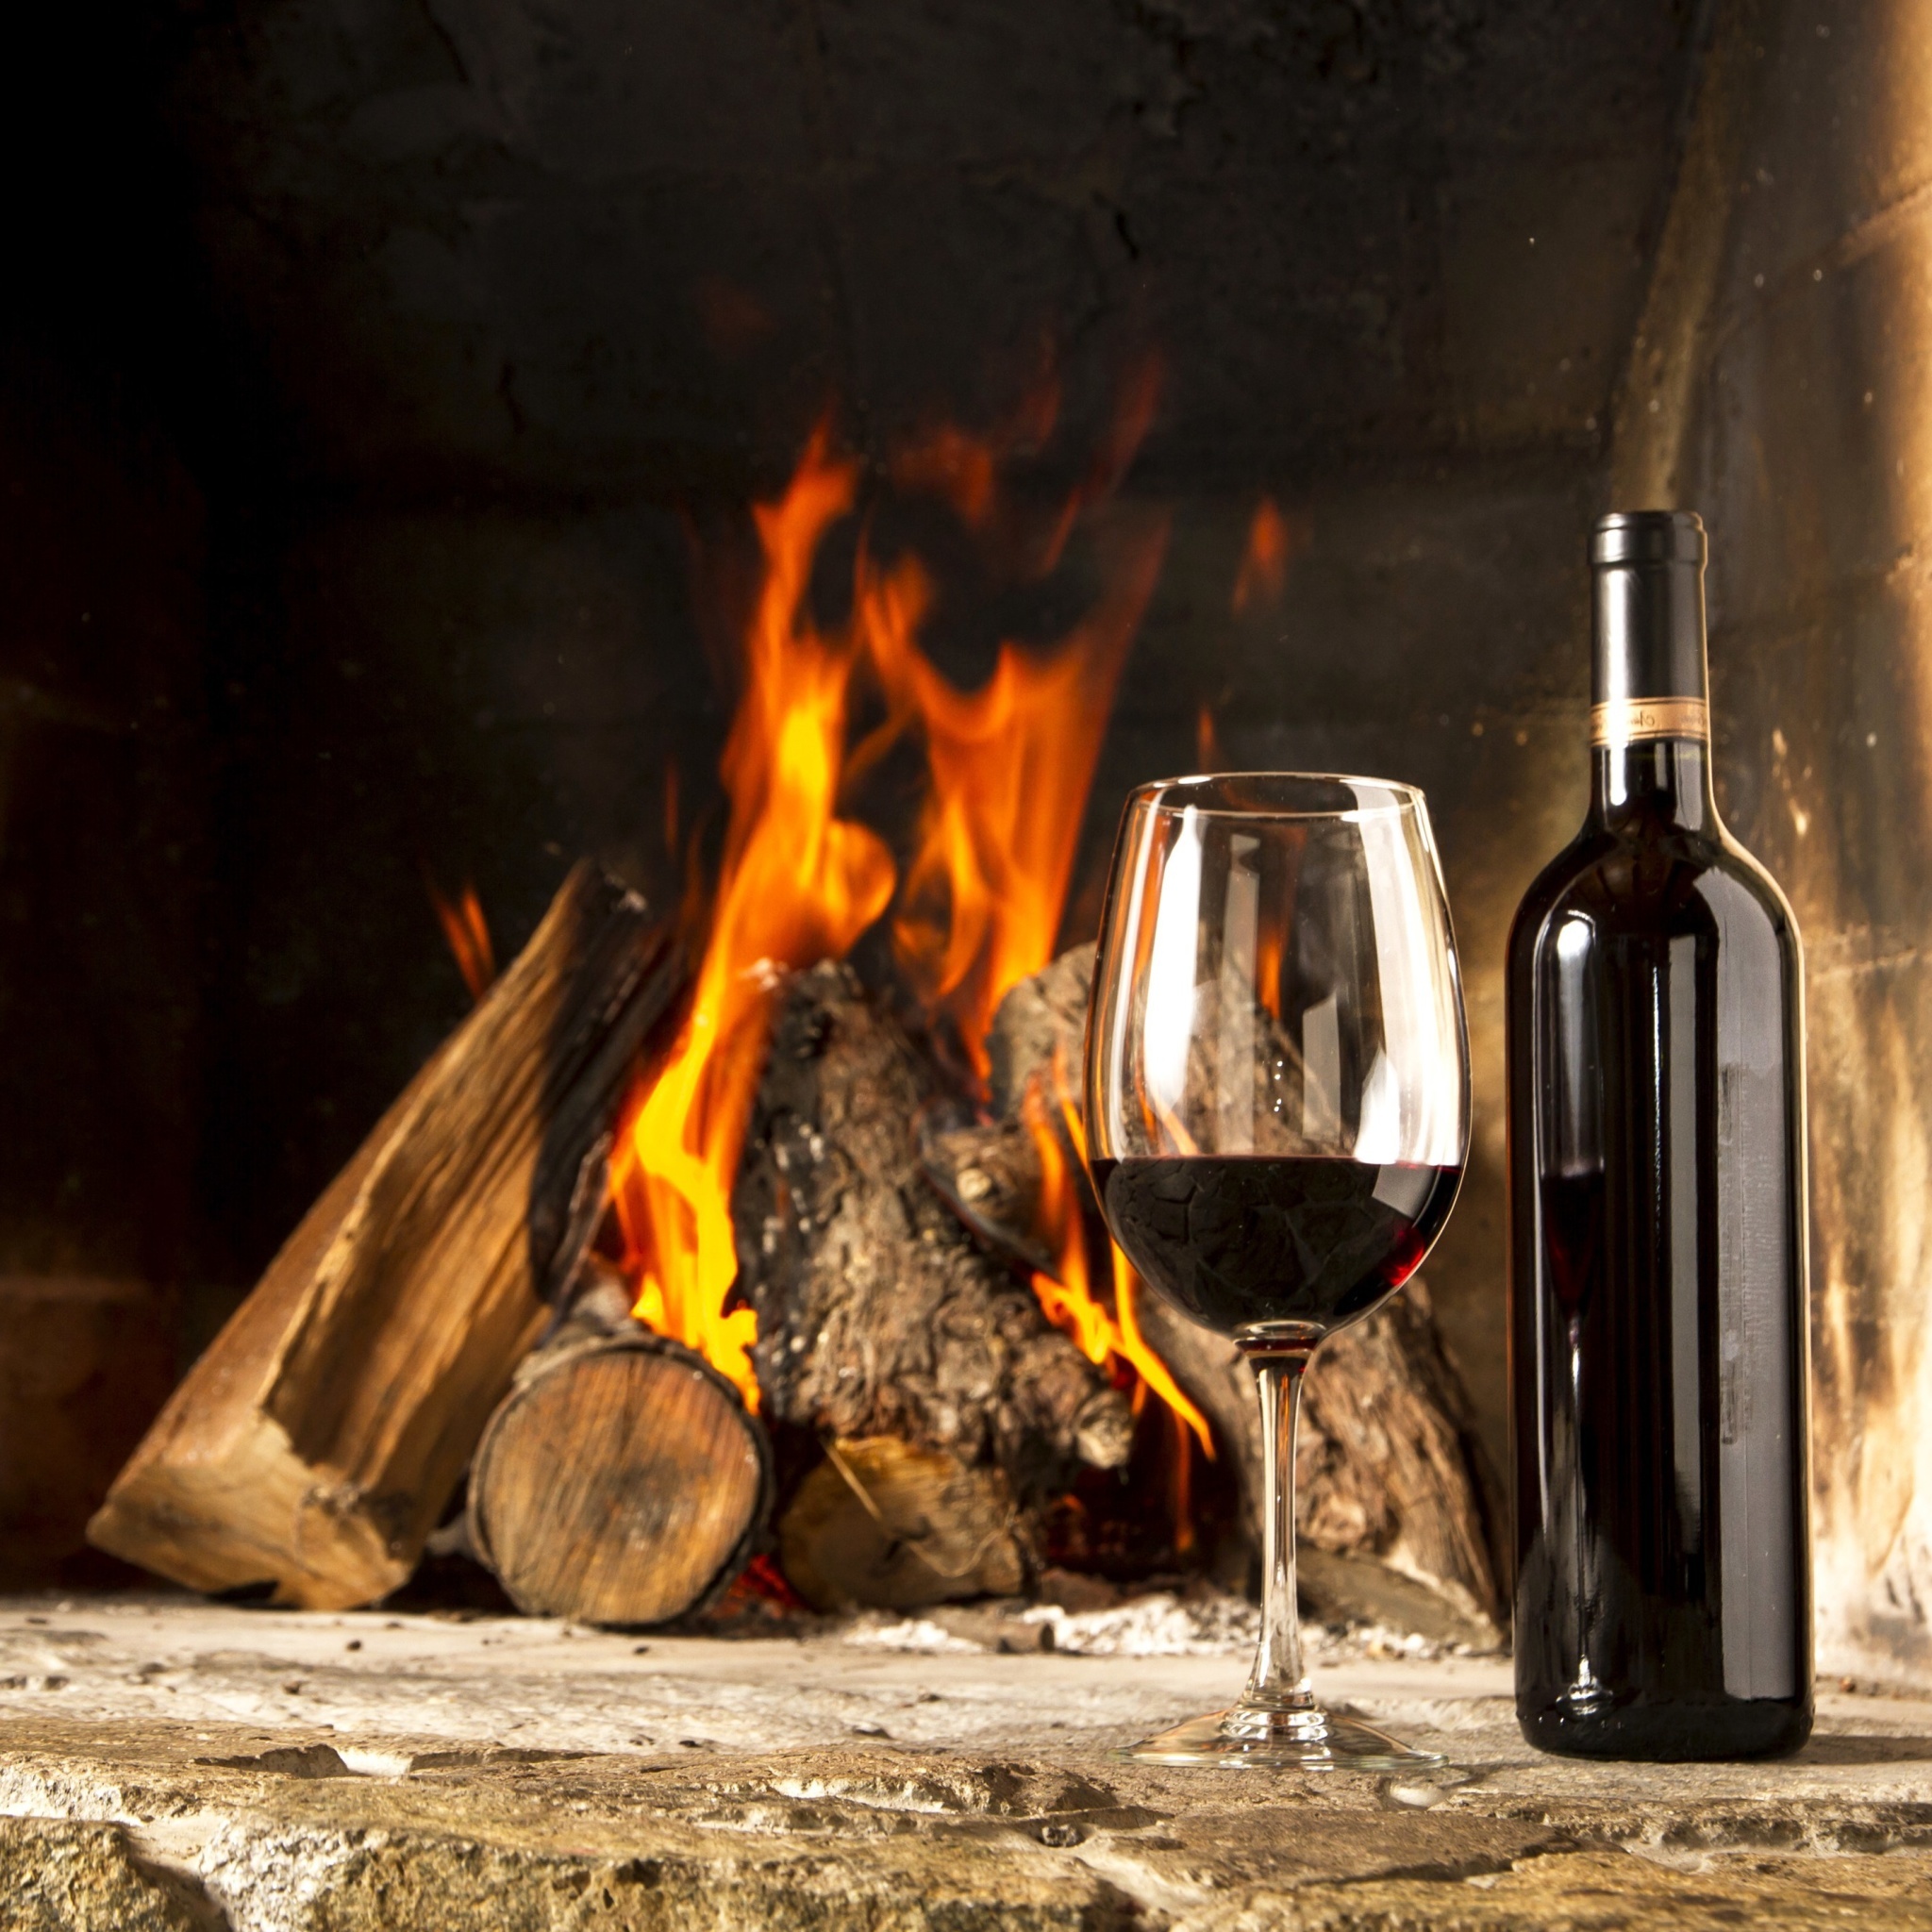 Wine and fireplace wallpaper 2048x2048